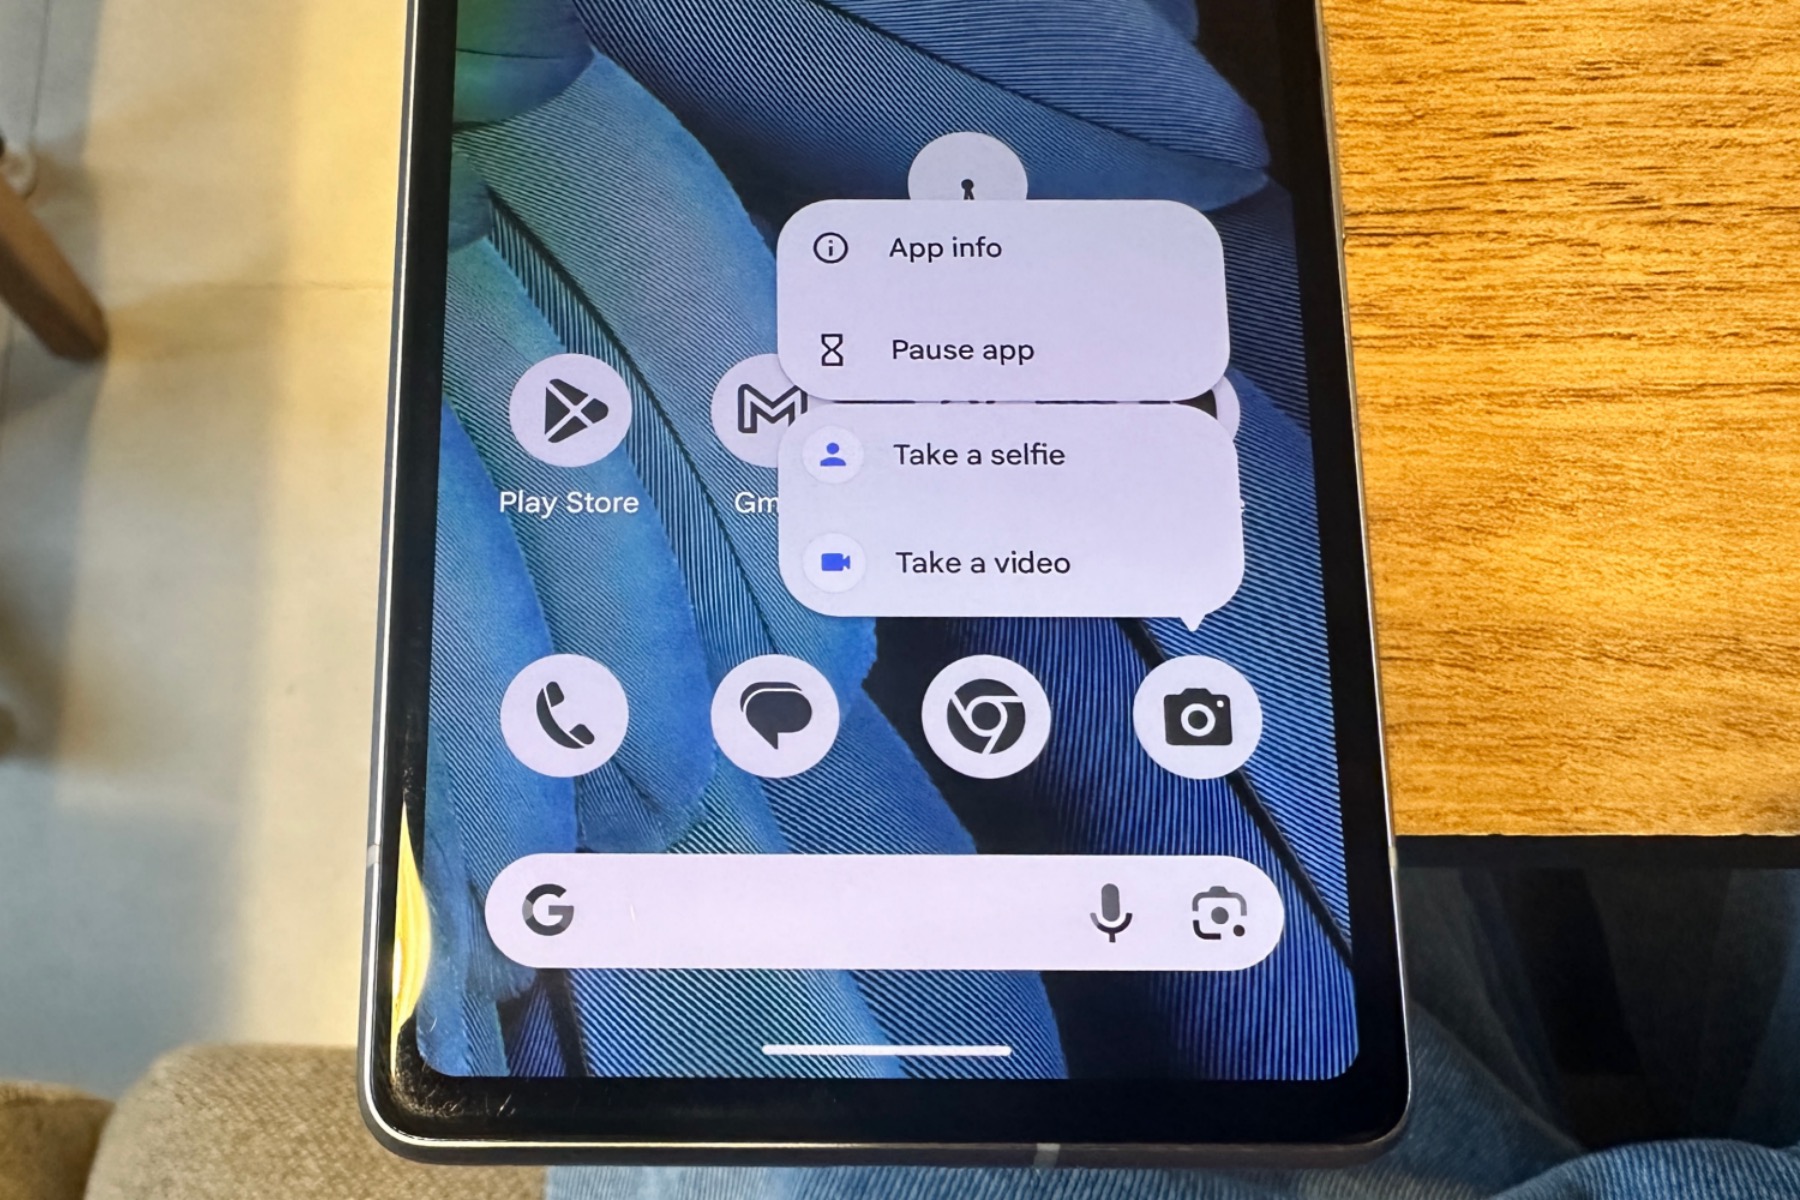 Long-press app shortcuts in Android 14.